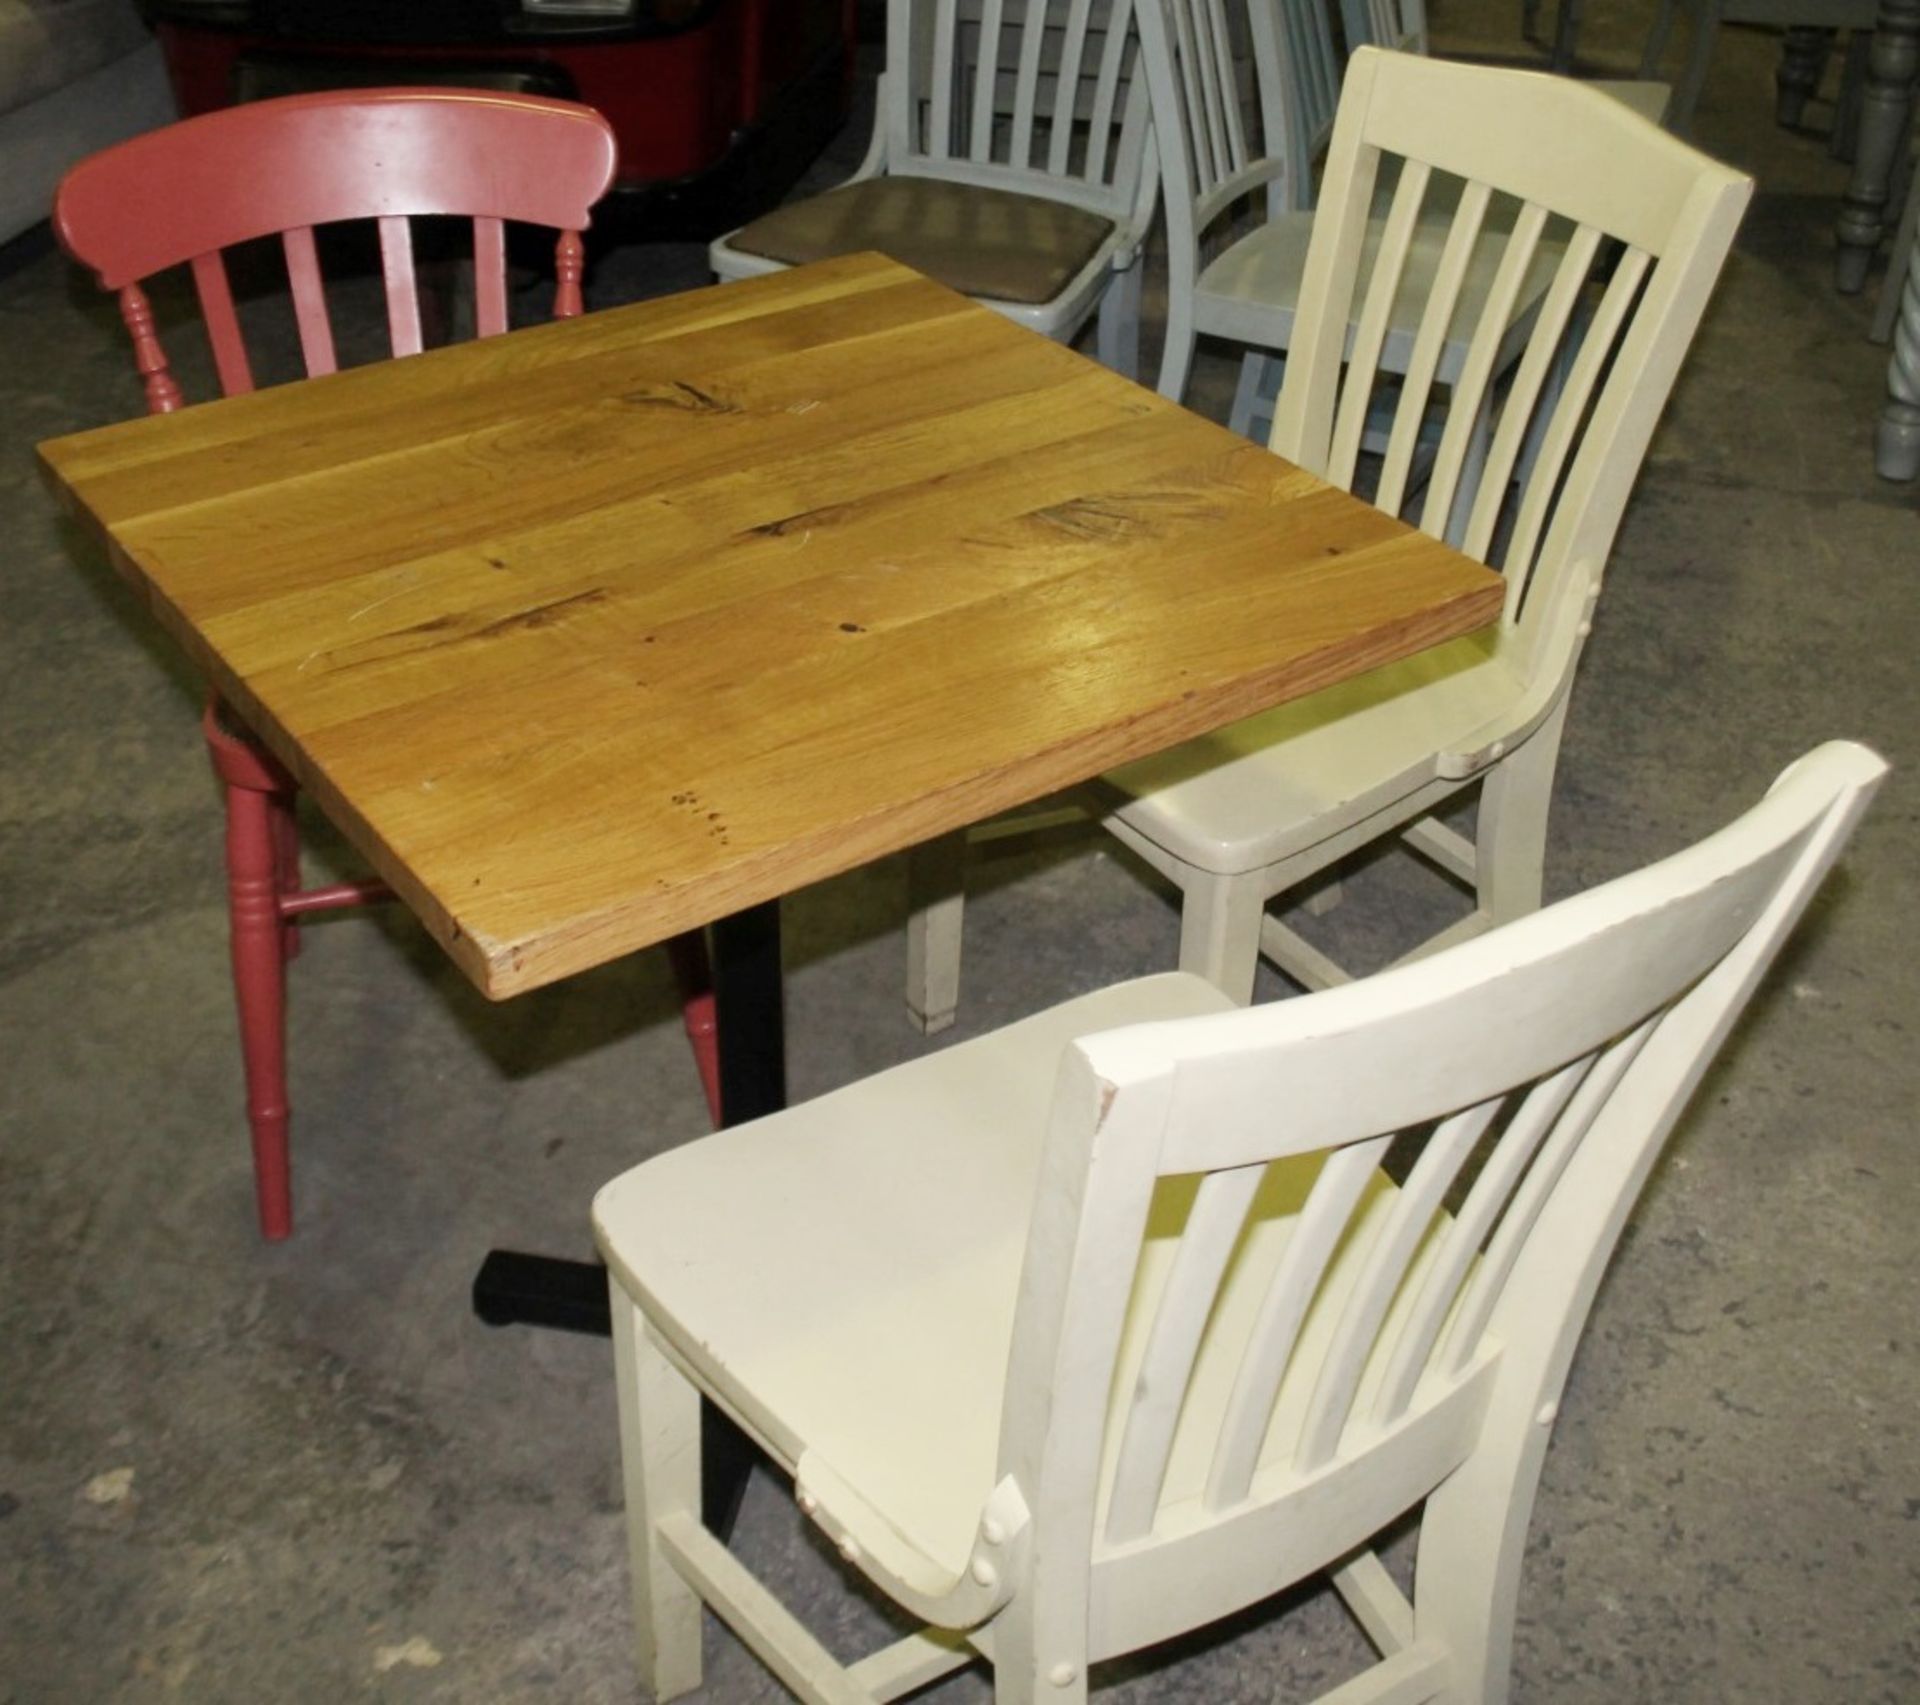 1 x Solid Wood Farmhouse Square Bistro Table With 3 x Chairs Featuring A Solid Oak Table Top - - Image 2 of 3